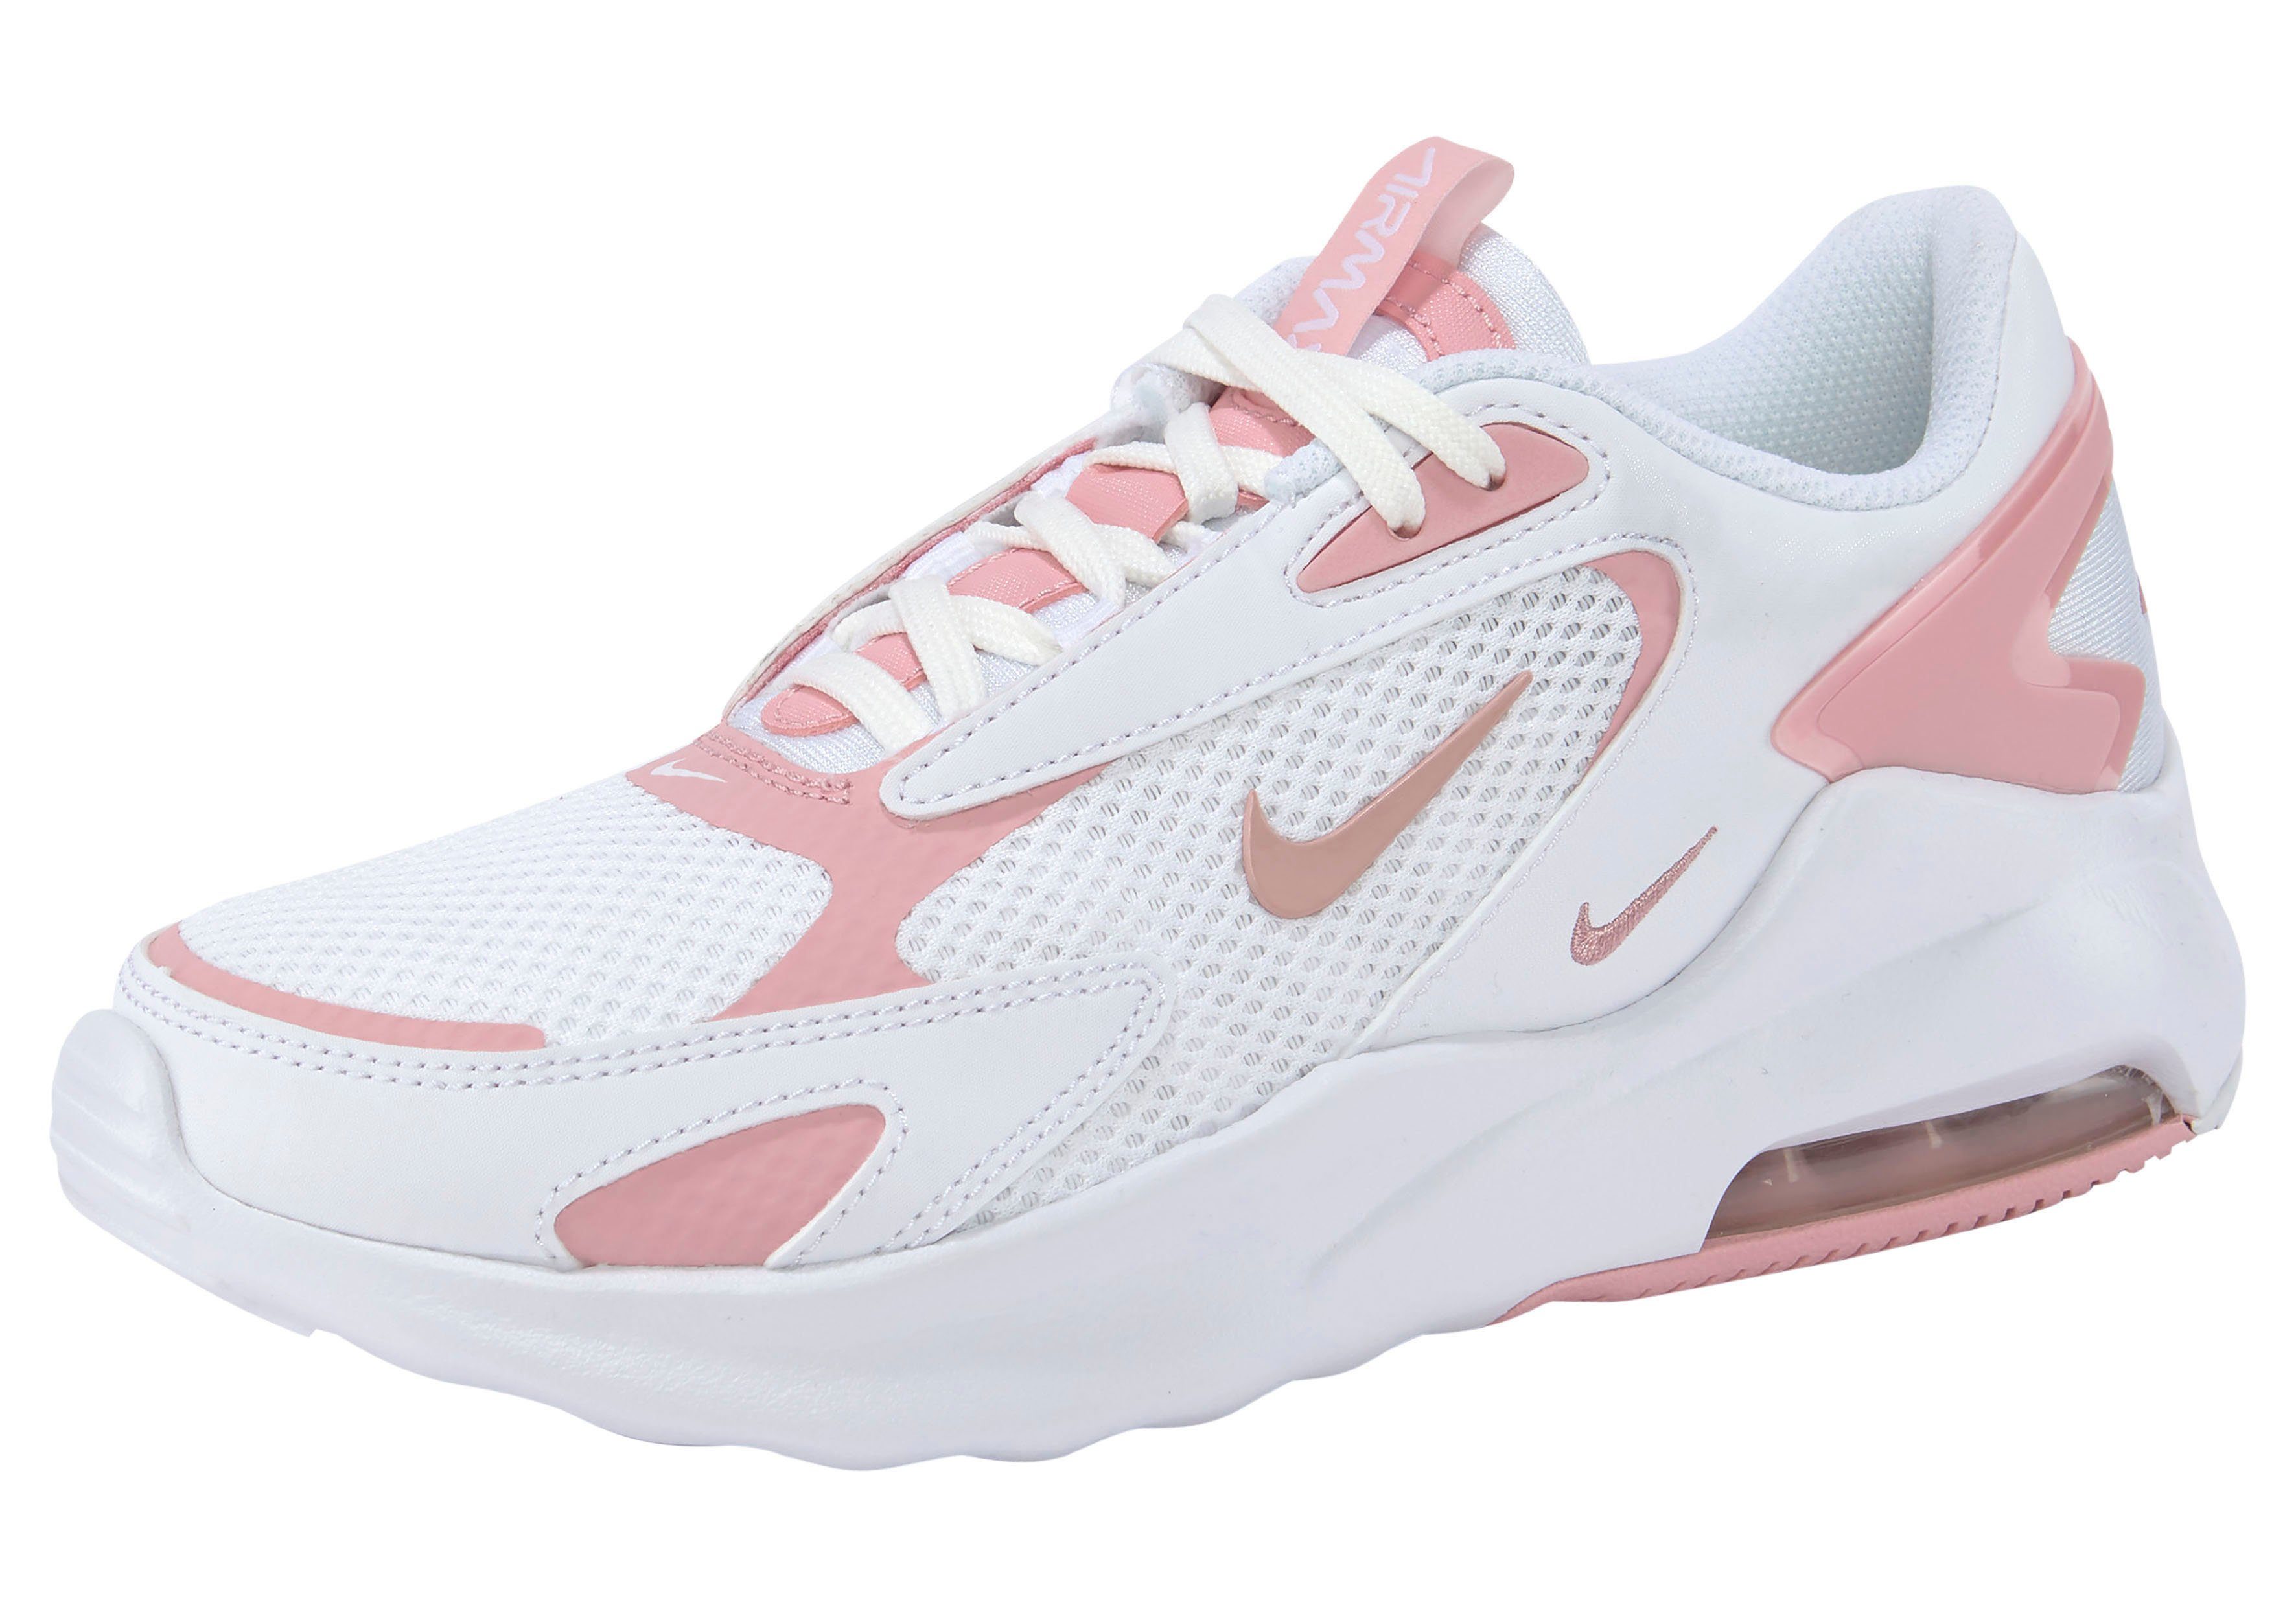 Nike Air Max in rosa online kaufen | OTTO